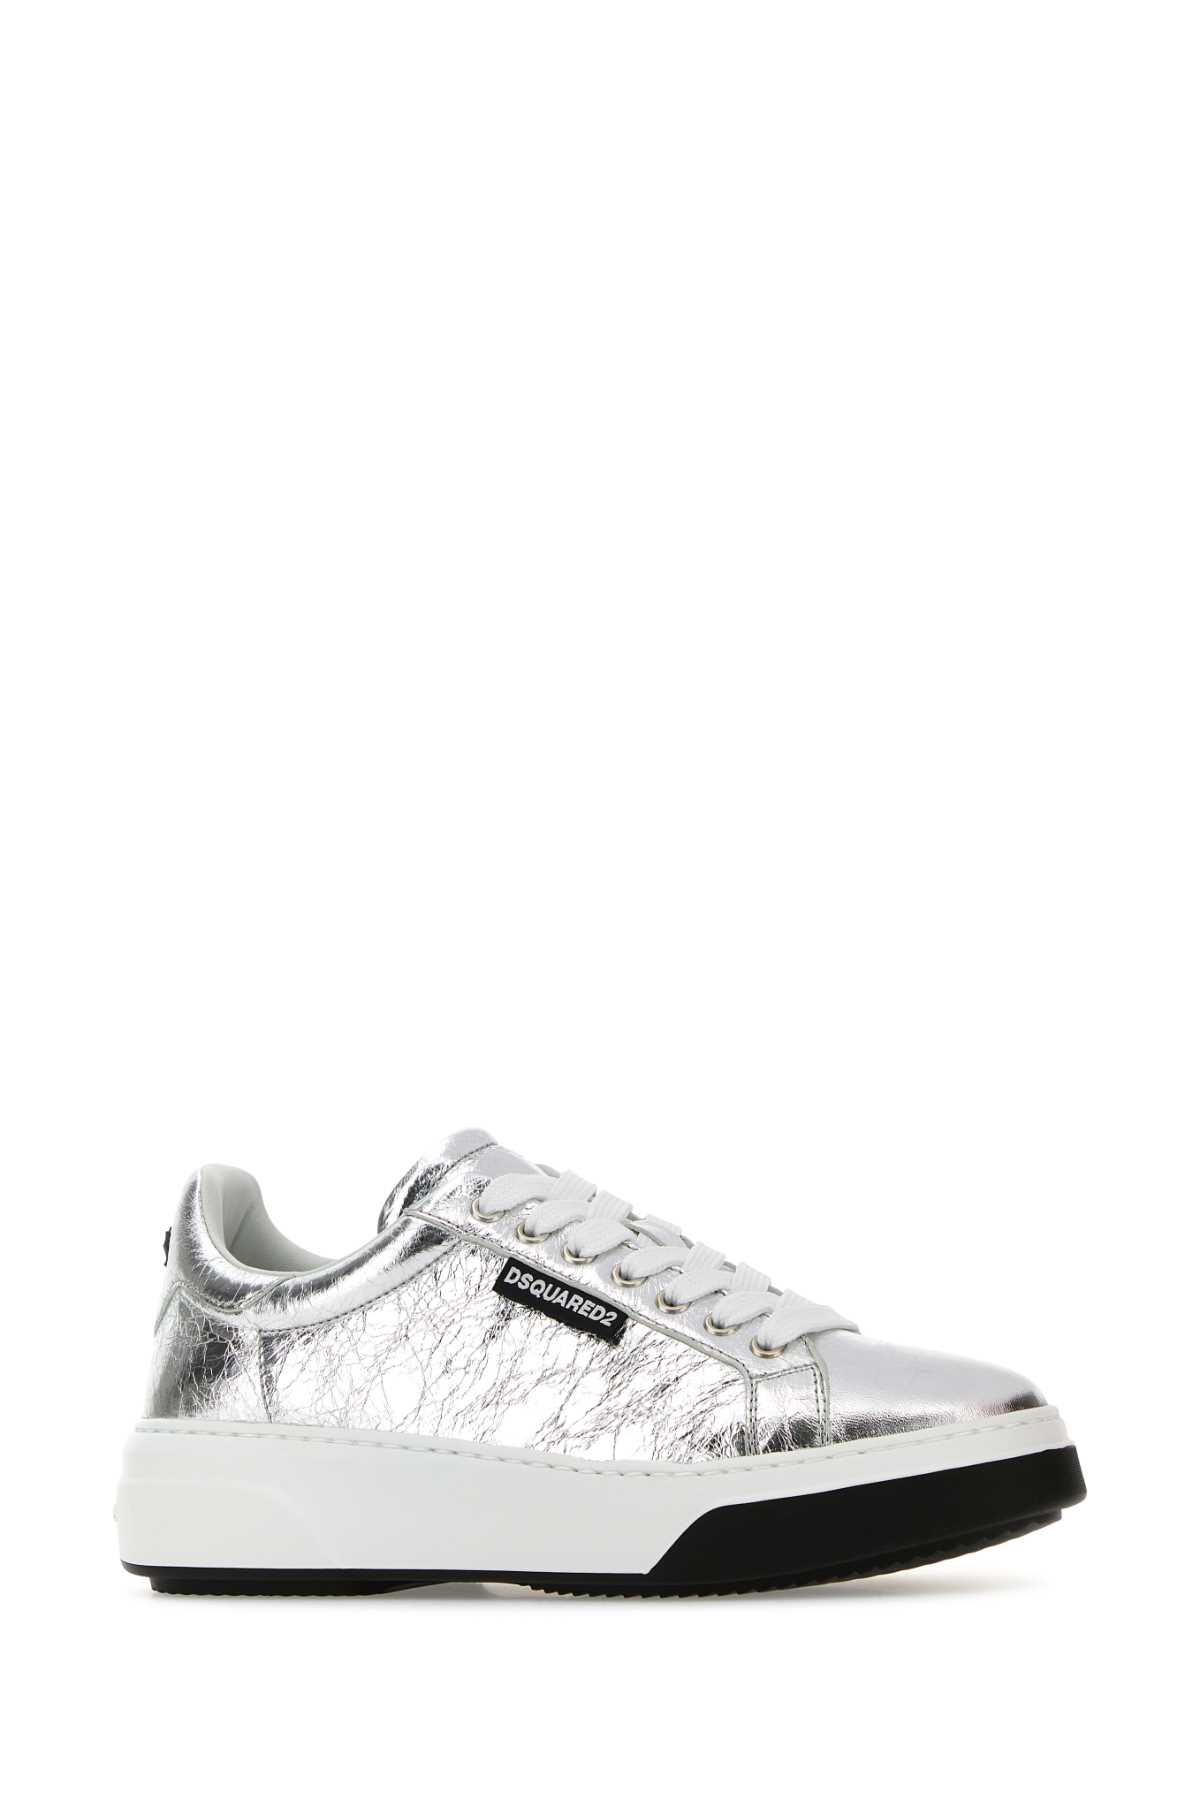 Dsquared2 Silver Leather Bumper Trainers In Argento